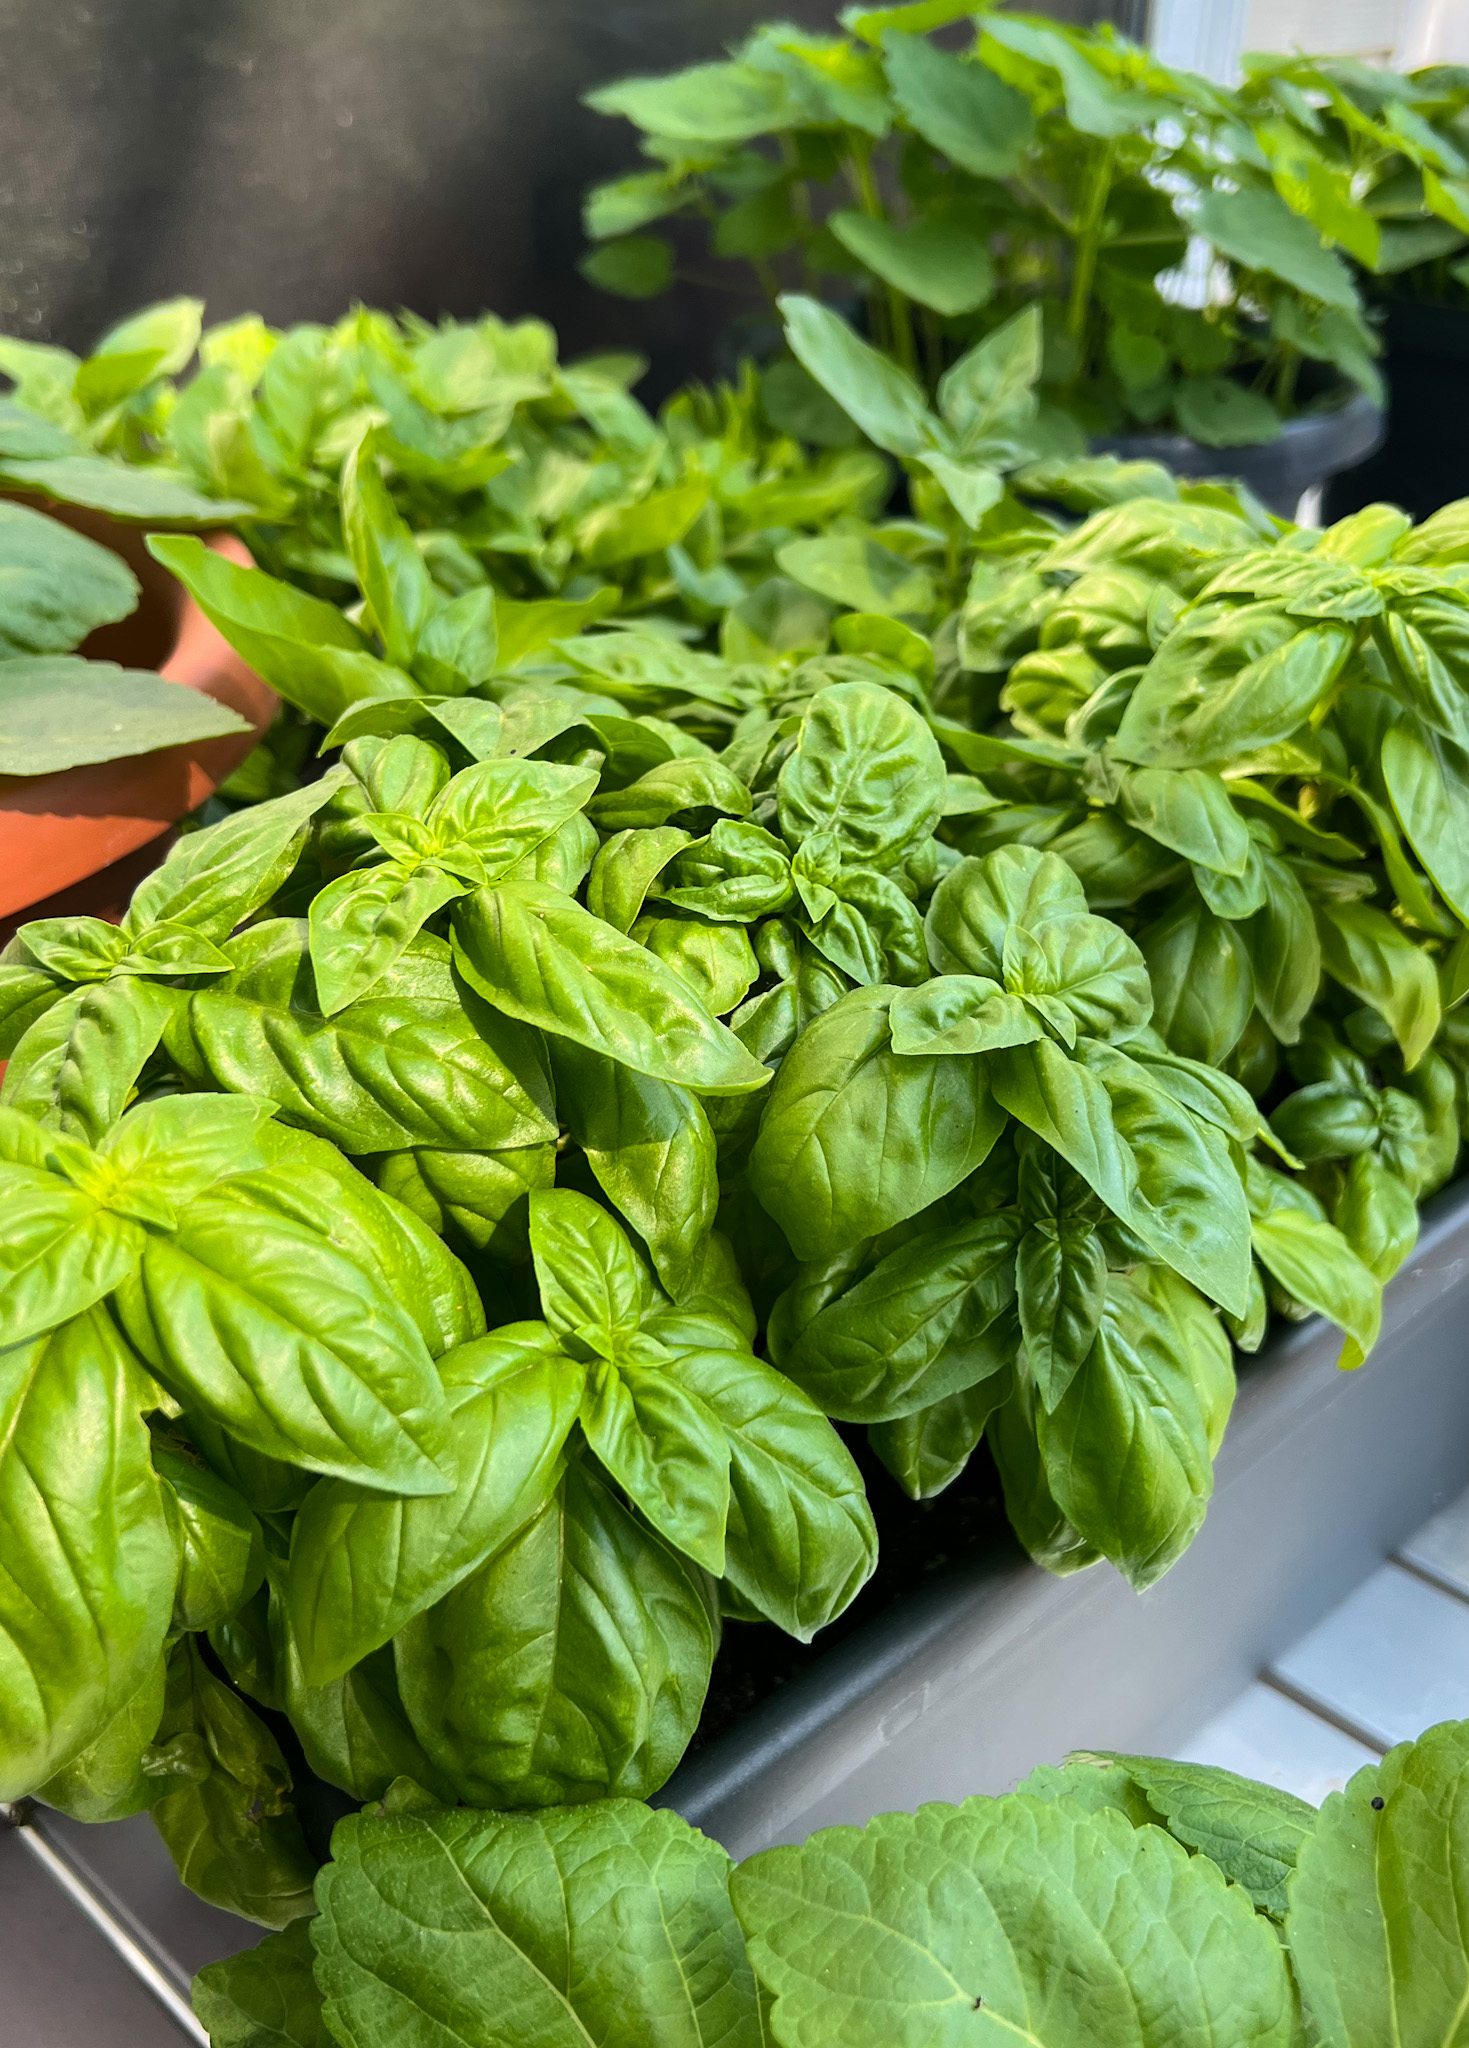 A close shot of fresh basil growing happily in a container in front of a screened window. The morning sunlight makes it appear vibrant green and lush